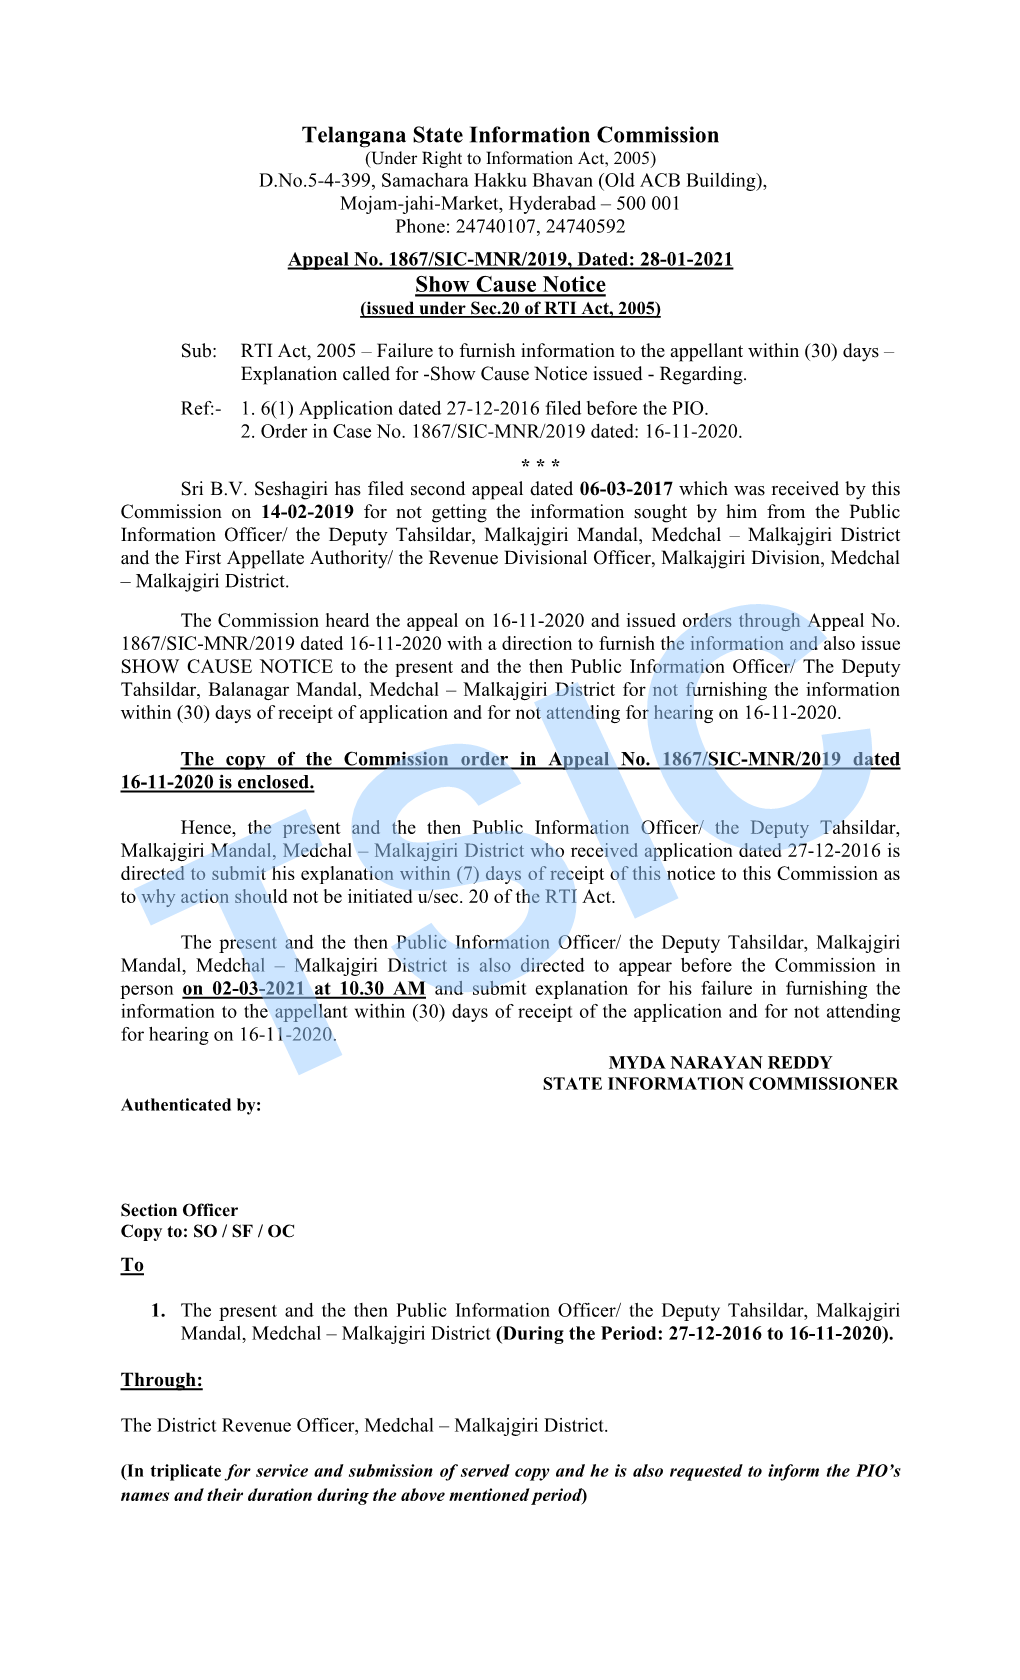 1867/SIC-MNR/2019, Dated: 28-01-2021 Show Cause Notice (Issued Under Sec.20 of RTI Act, 2005)